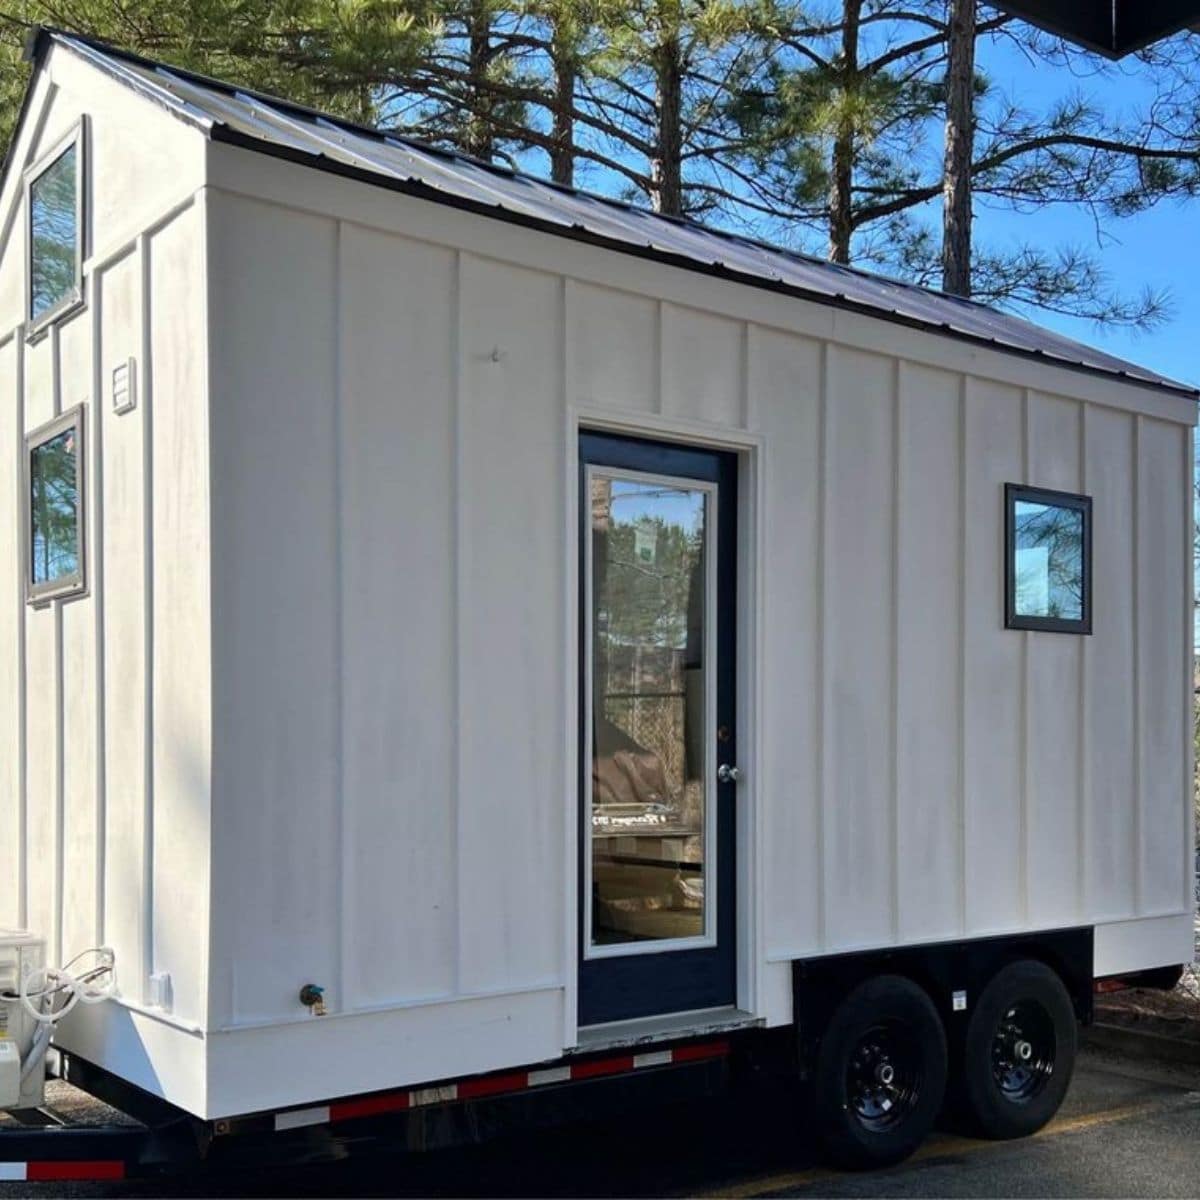 16' Compact Tiny House Packs in All Your Essentials & More!